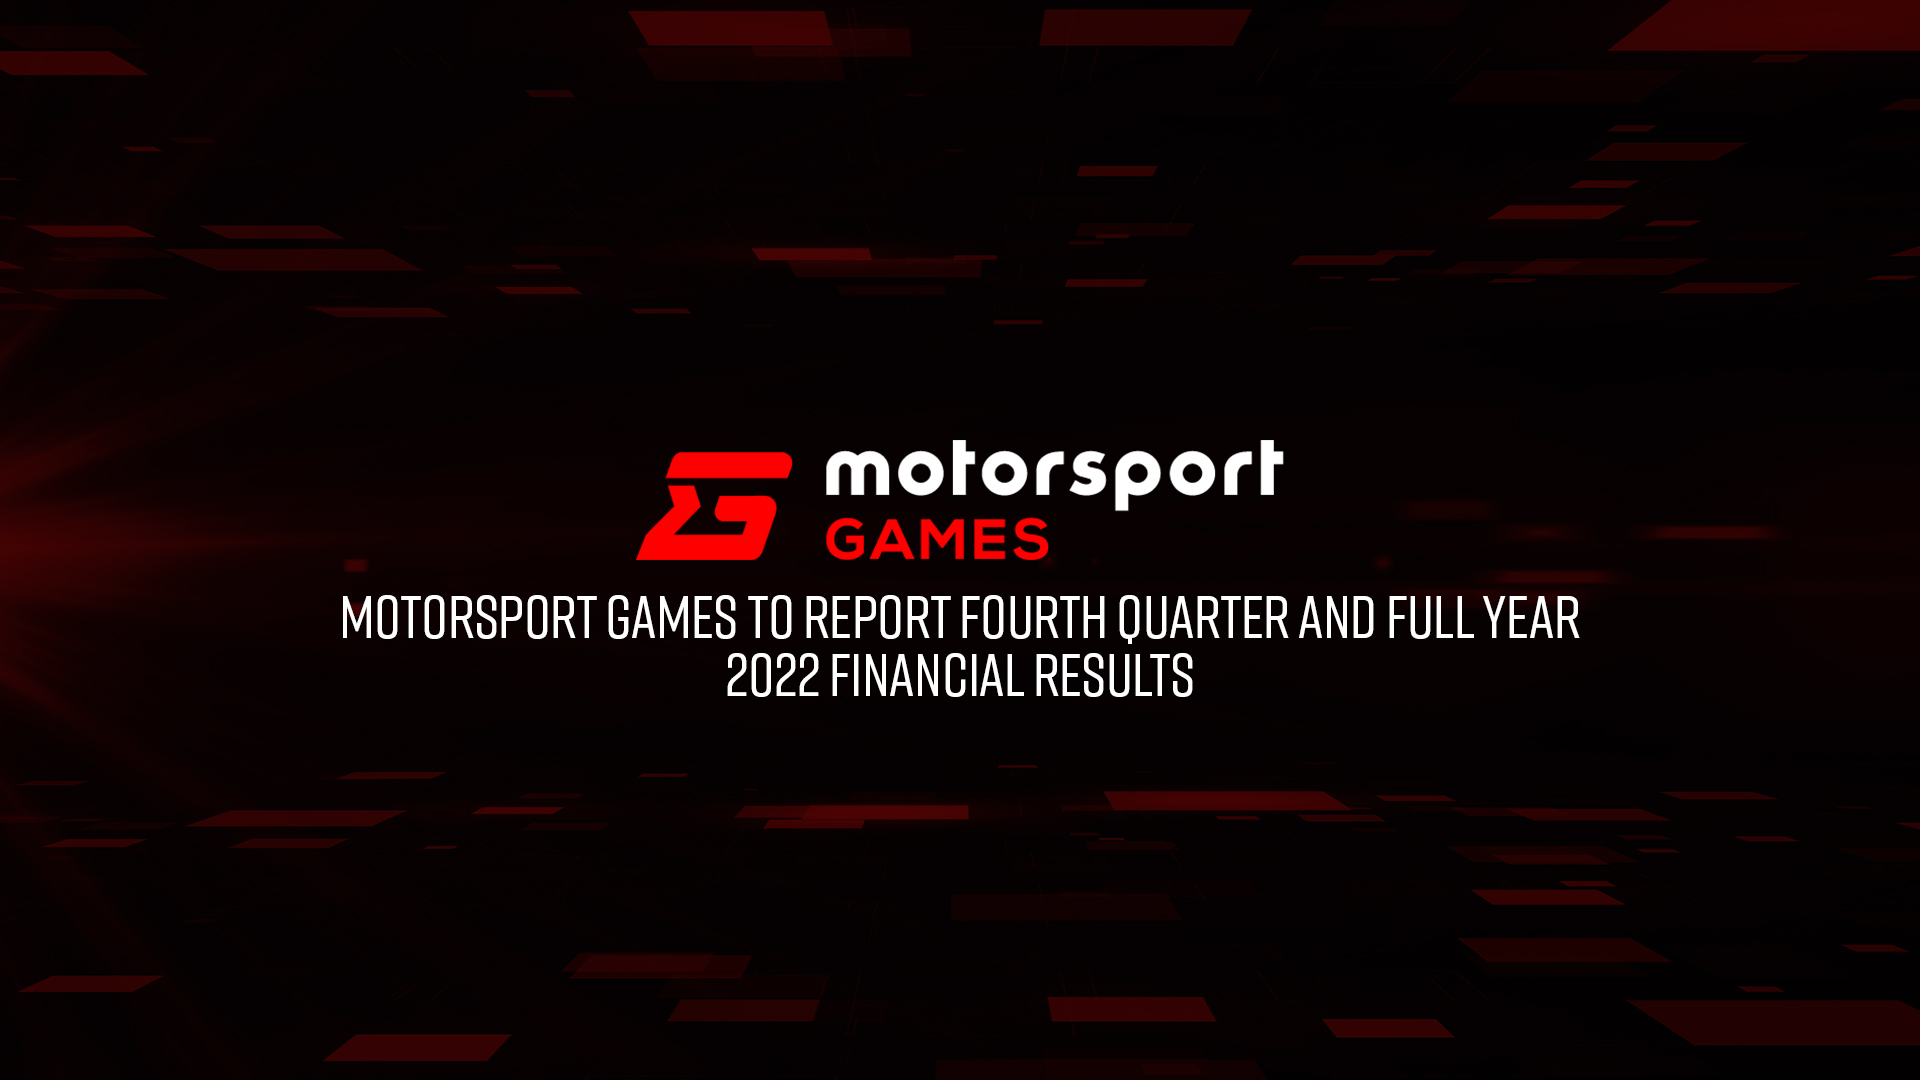 Motorsport Games to report fourth quarter 2022 and full year 2022 results